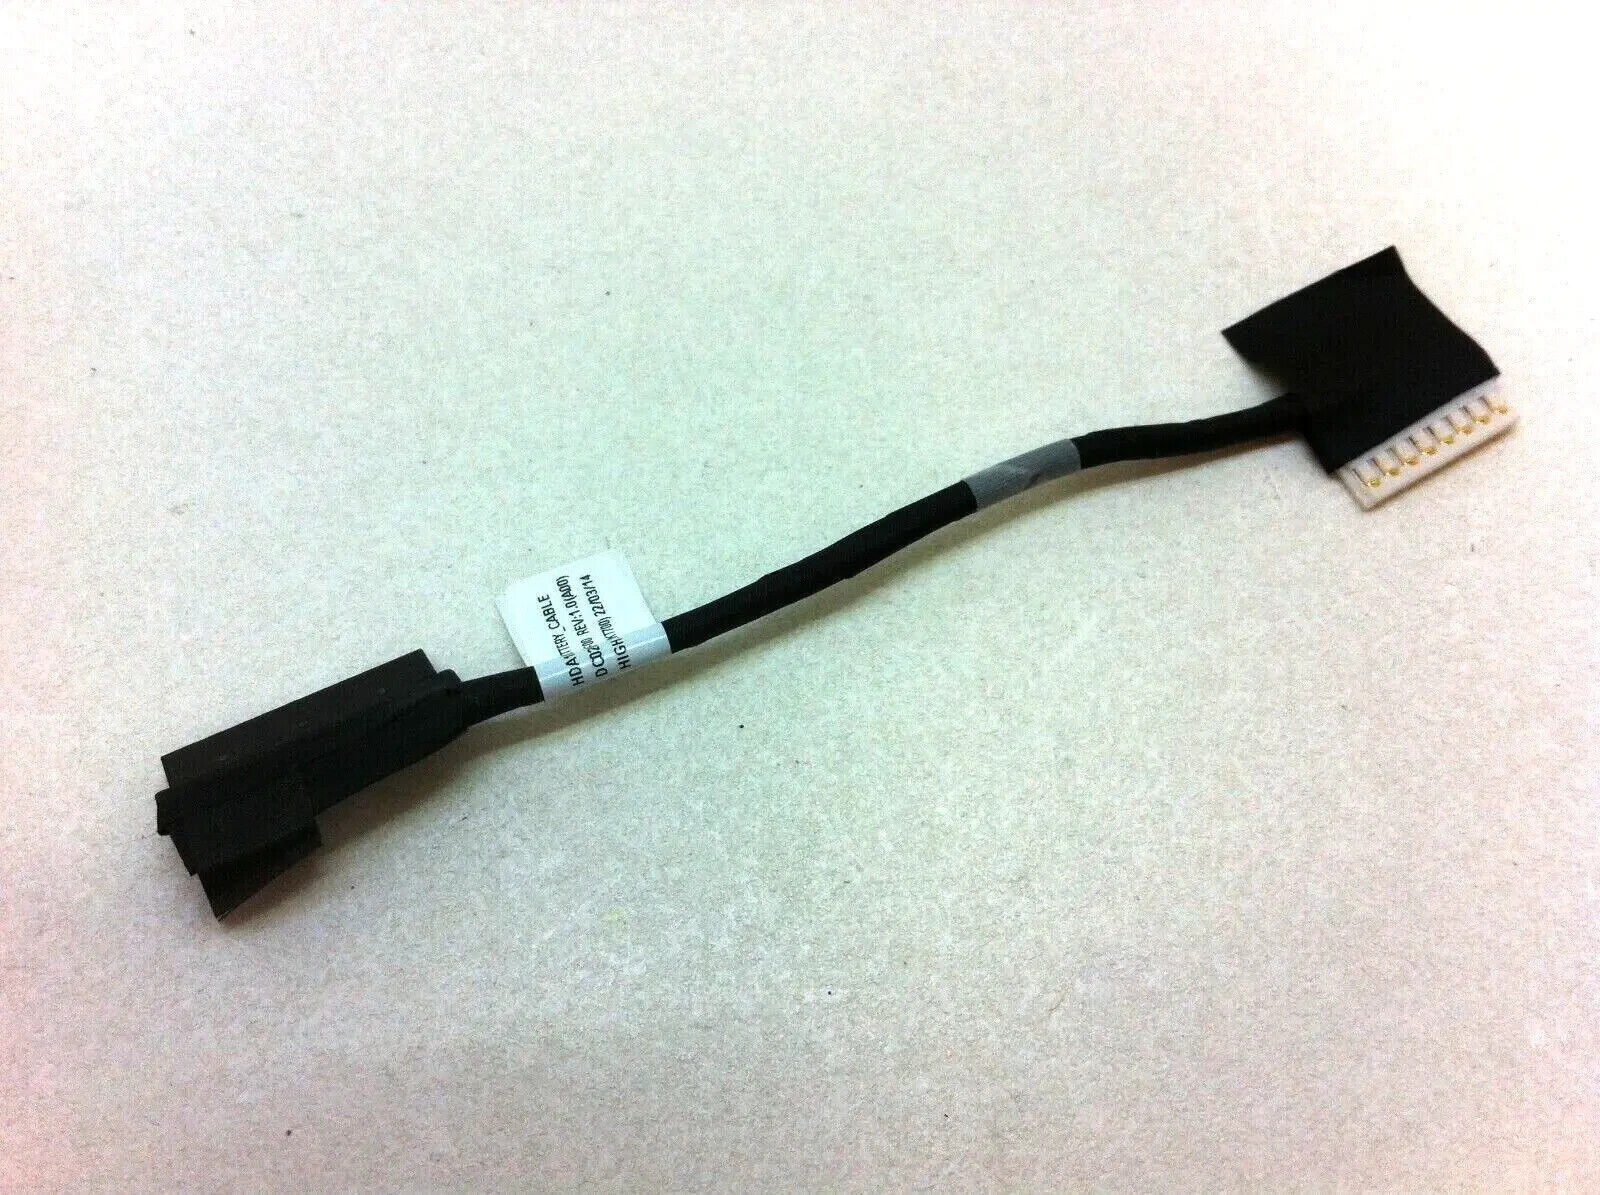 NEW Dell OEM Chromebook 3110 2in1 Laptop Original Battery Cable - 7T73H